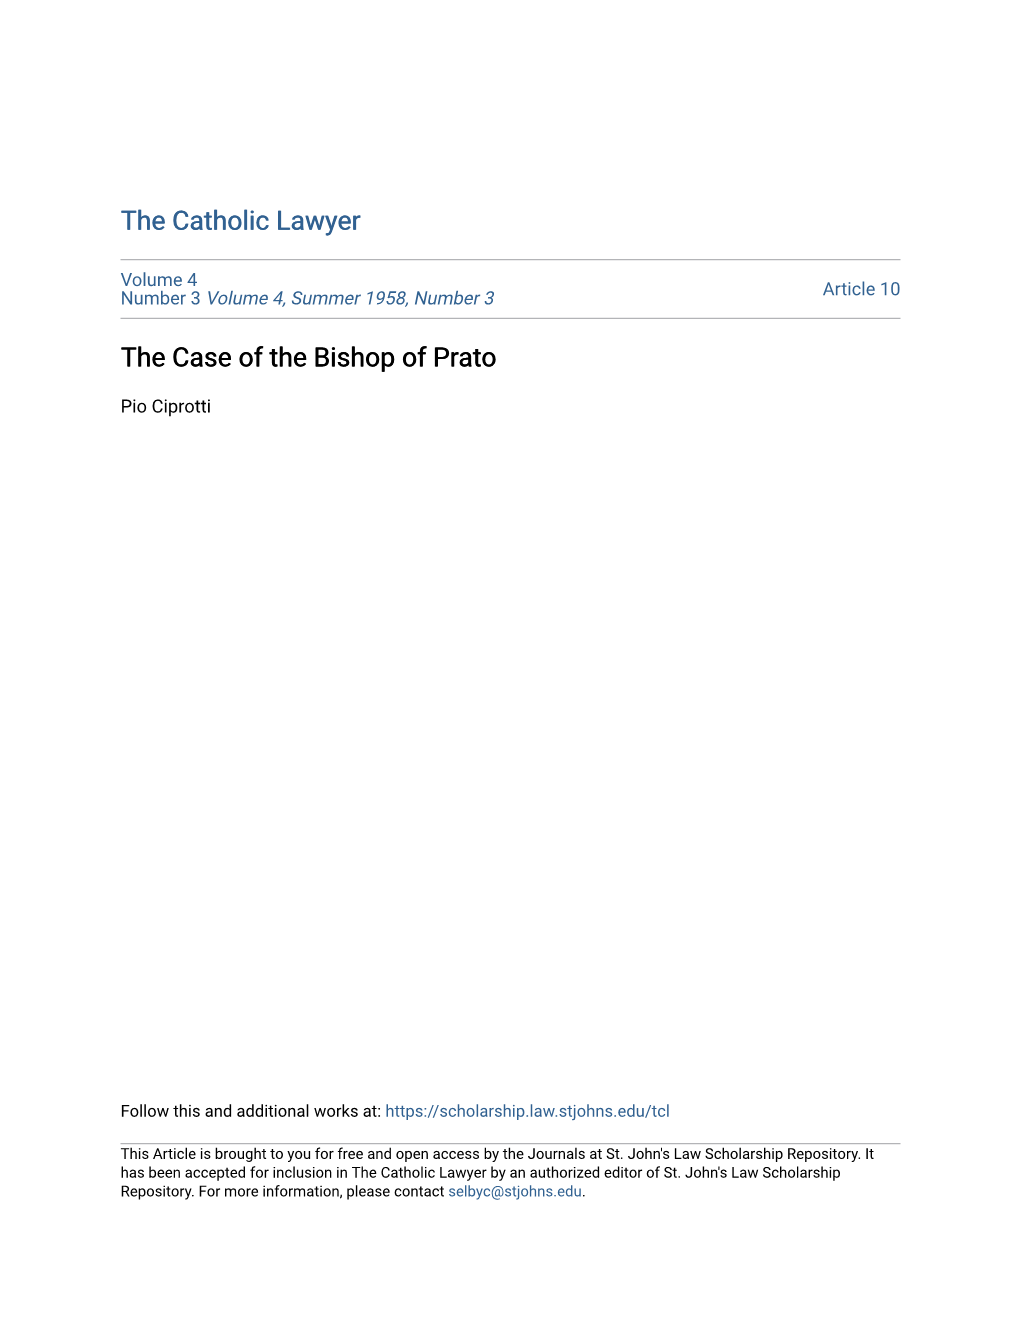 THE CASE of the BISHOP of PRATO T